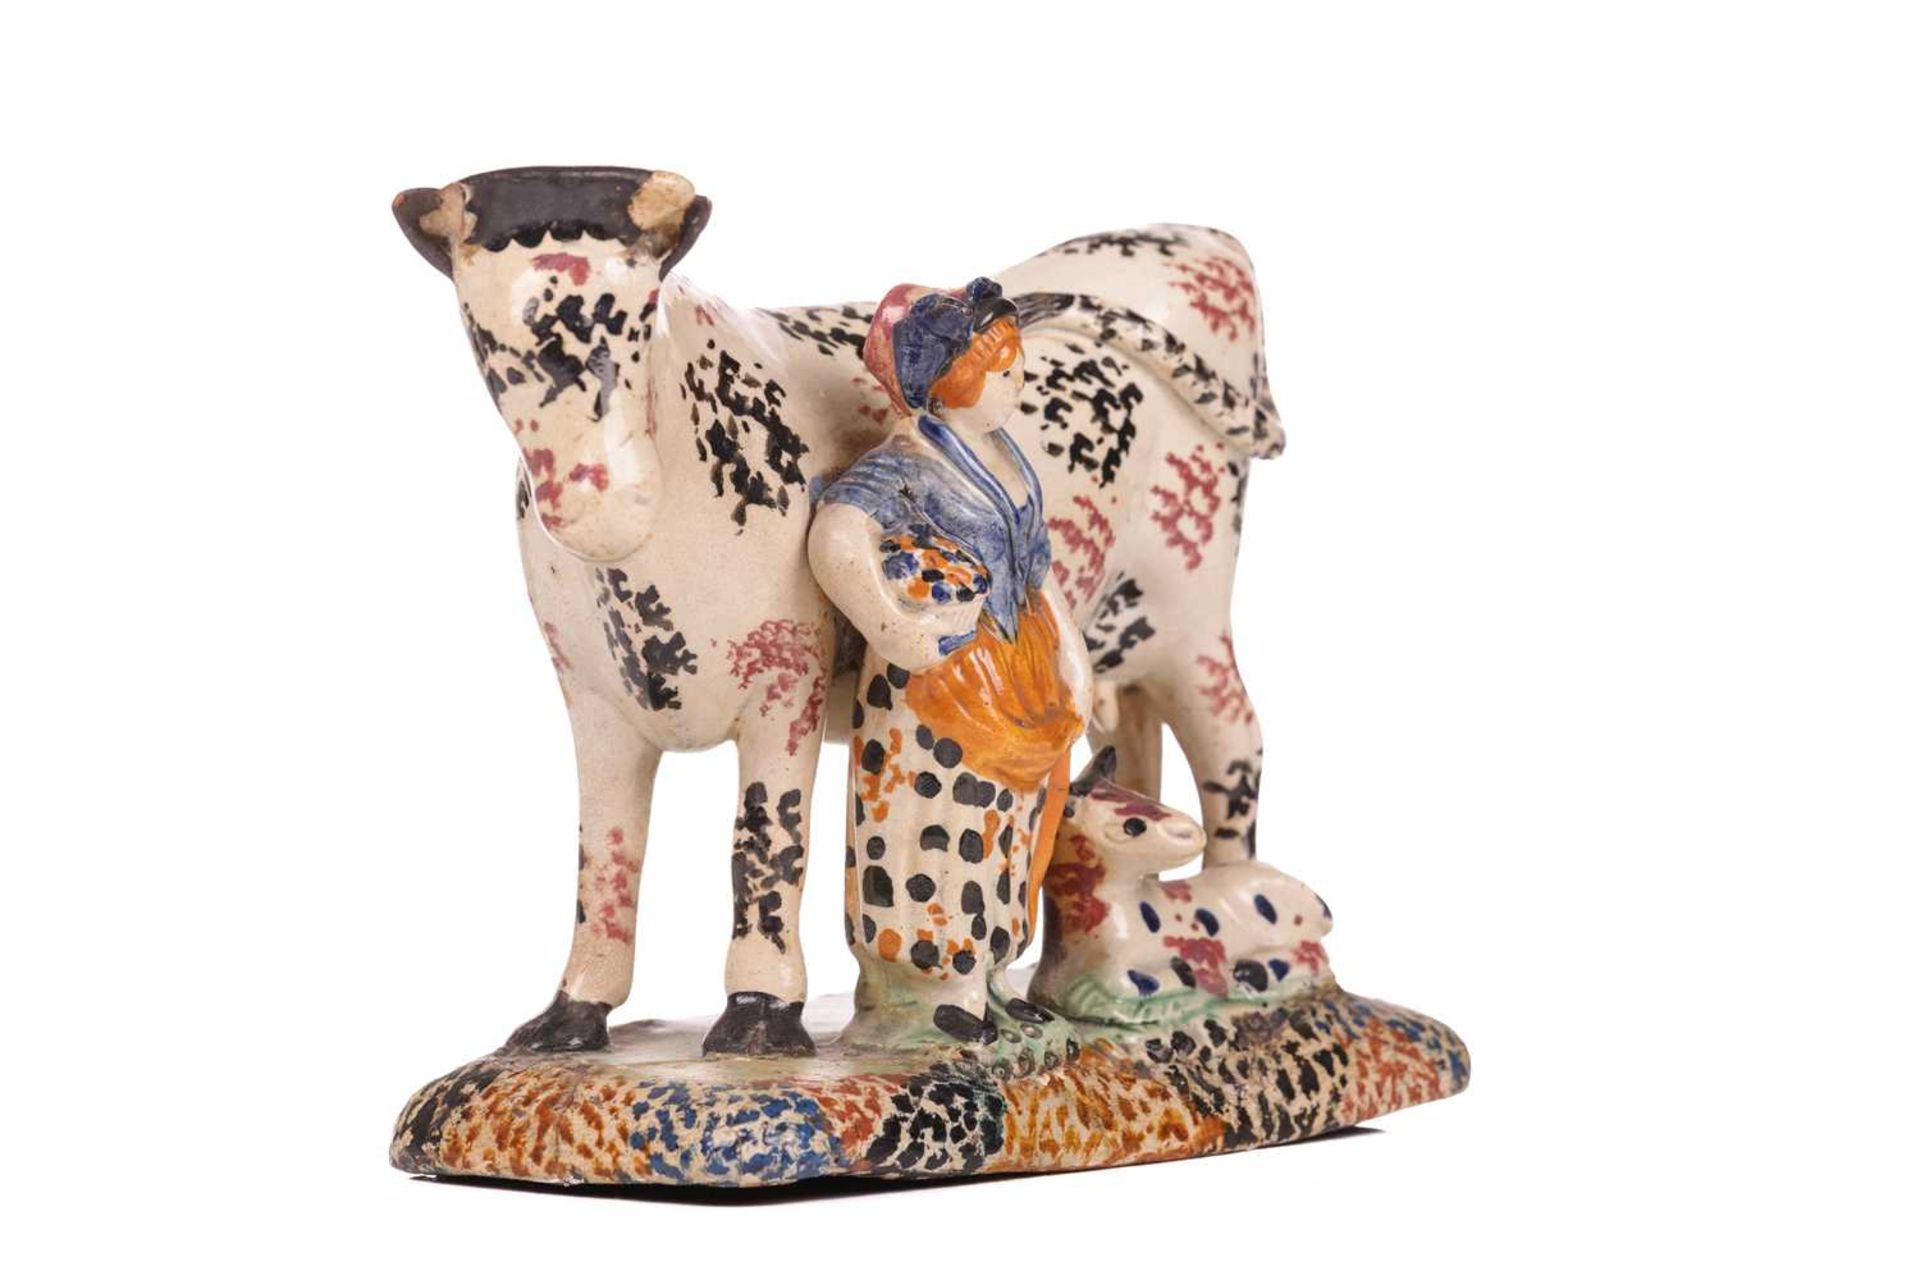 An early 19th-century Prattware ceramic cow, milkmaid and calf figure, circa 1810 with sponged decor - Image 3 of 7